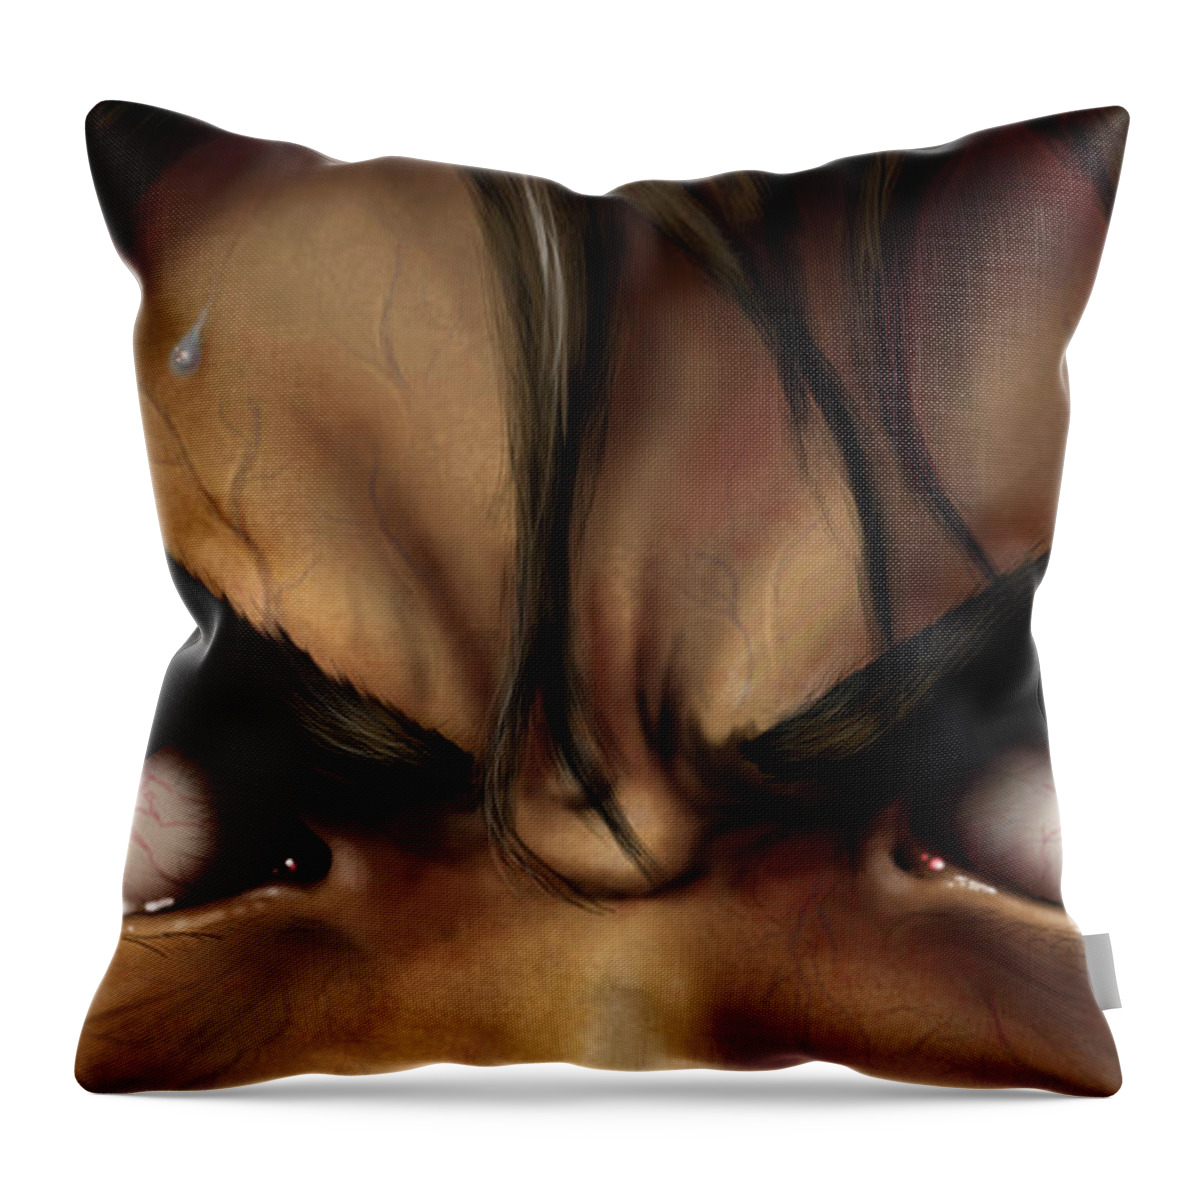 Attack On Titan Throw Pillow featuring the digital art Attack On Titan #21 by Super Lovely